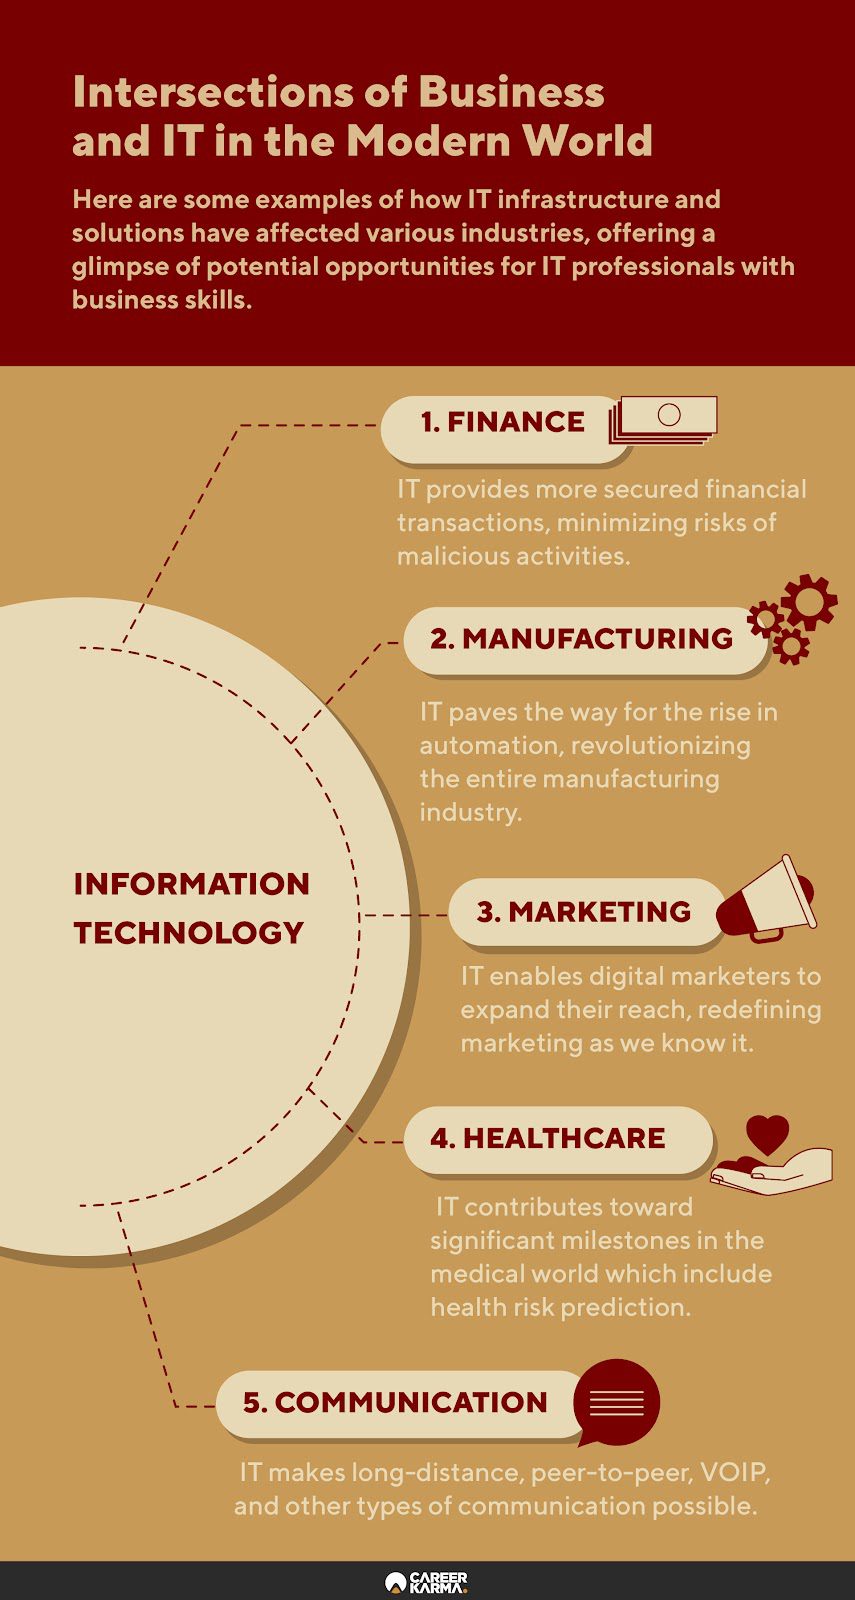 An infographic highlighting the intersection between business and information technology